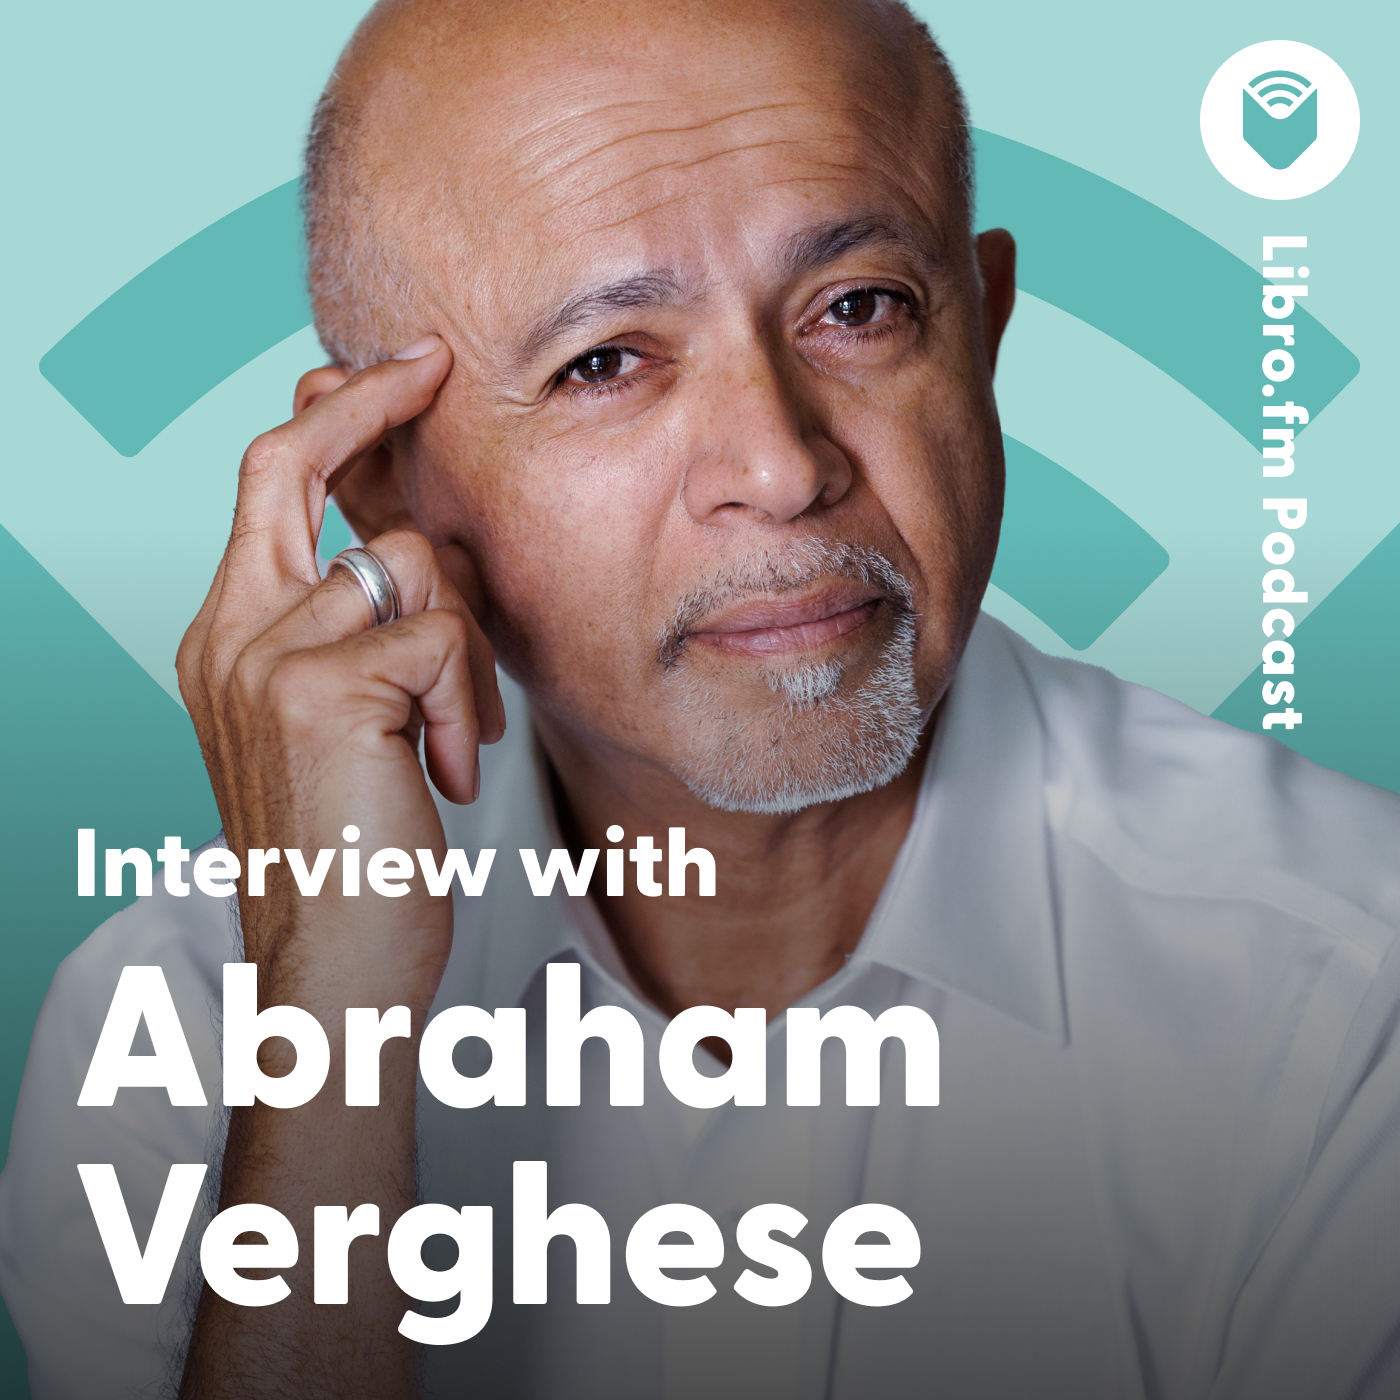 A headshot of Abraham Verghese on a teal background showing the Libro.fm logo. Text reads: “Libro.fm Podcast: Interview with Abrahham Verghese.